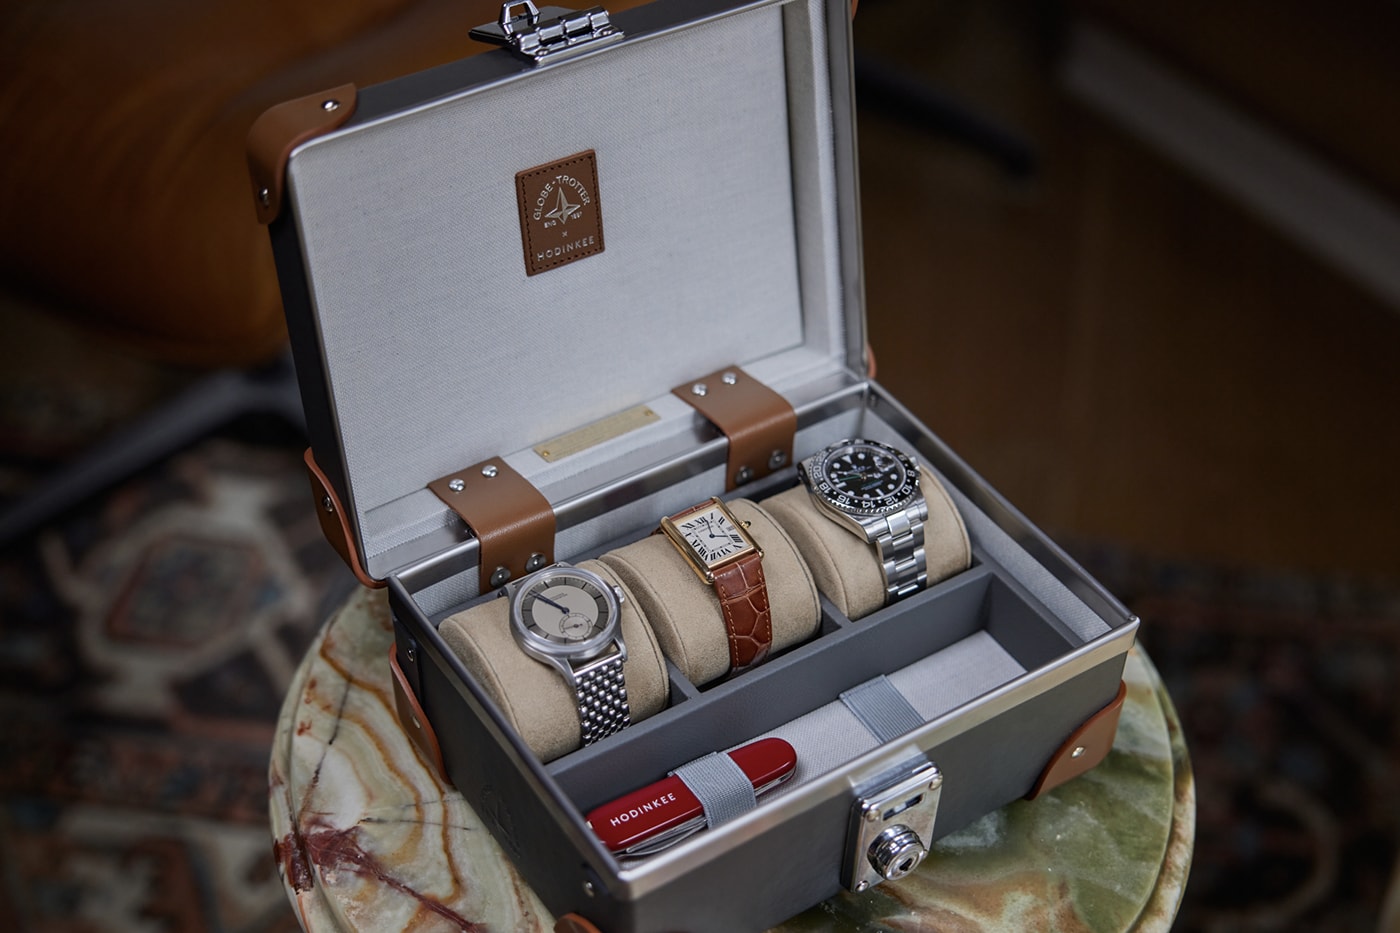 Hodinkee x Globe-Trotter Second Watch CaseCollaboration Release Info